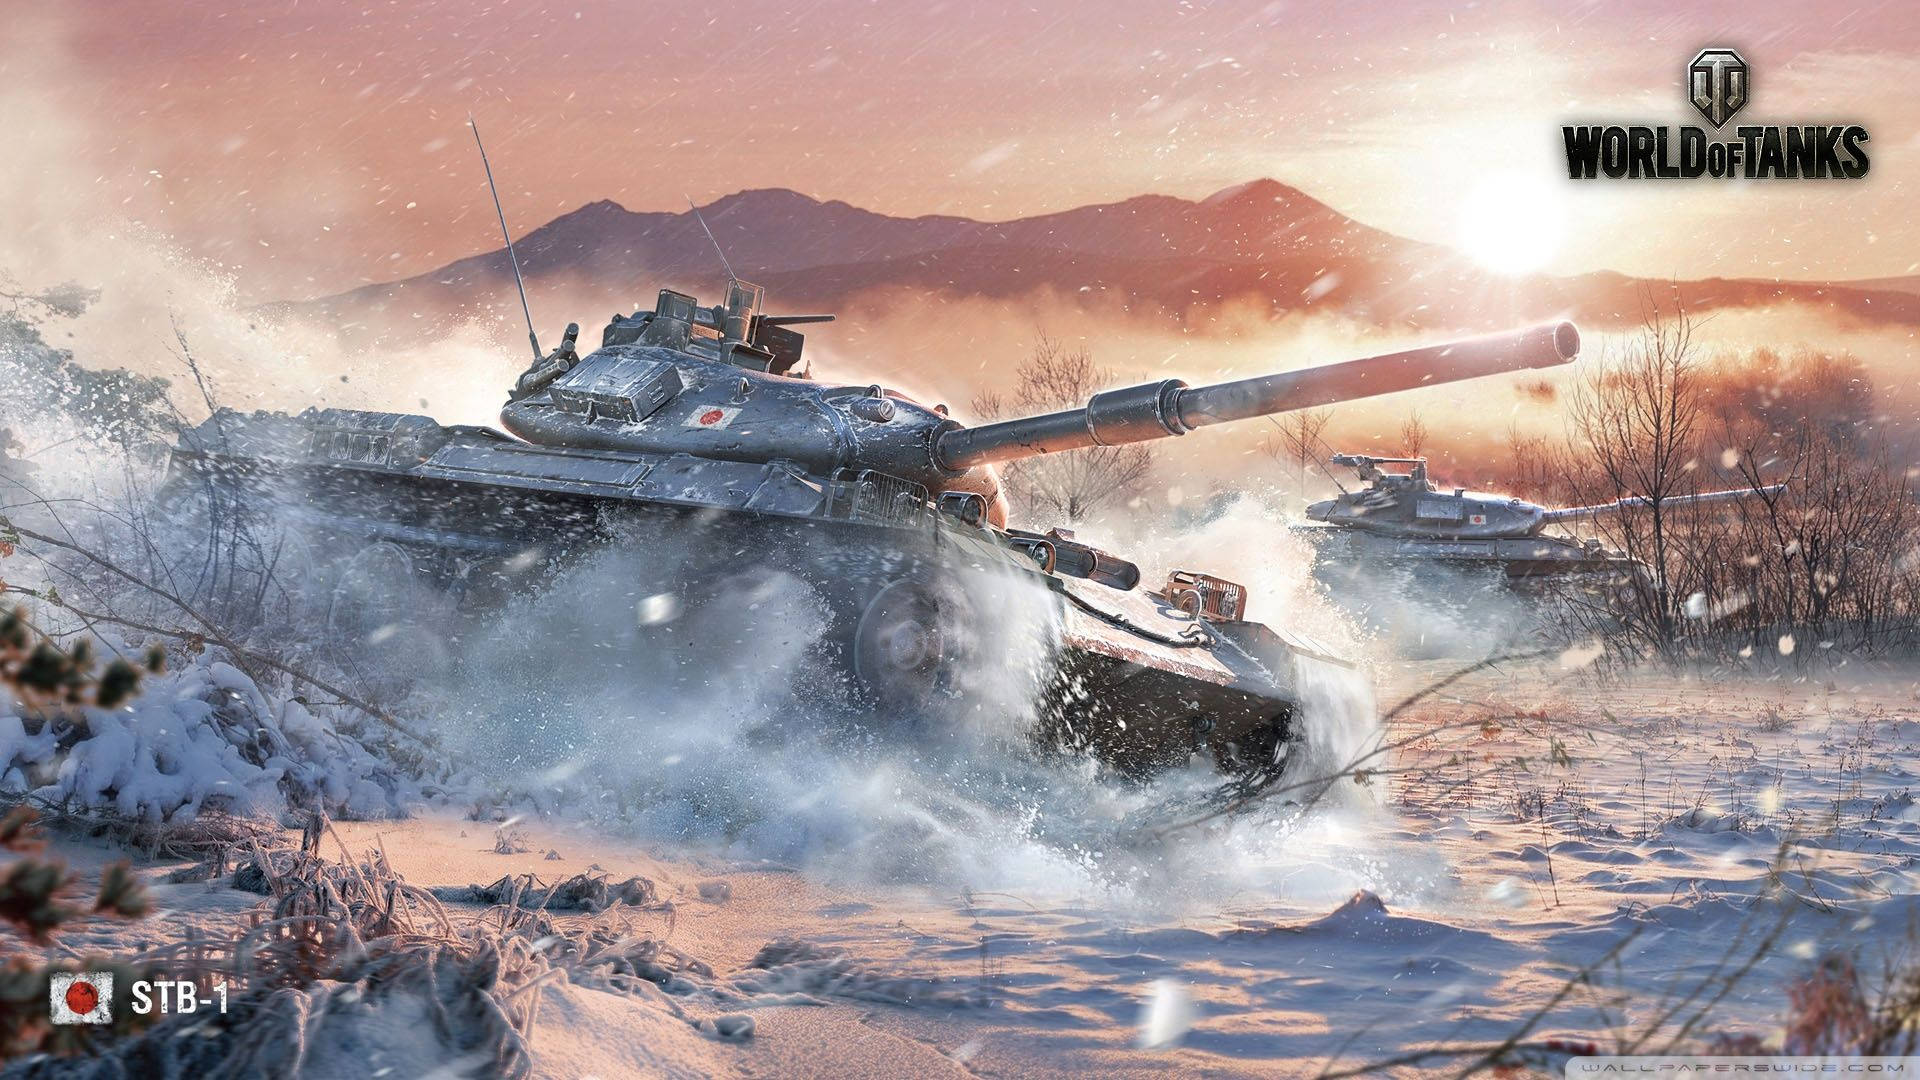 World Of Tanks Stb-1 Background